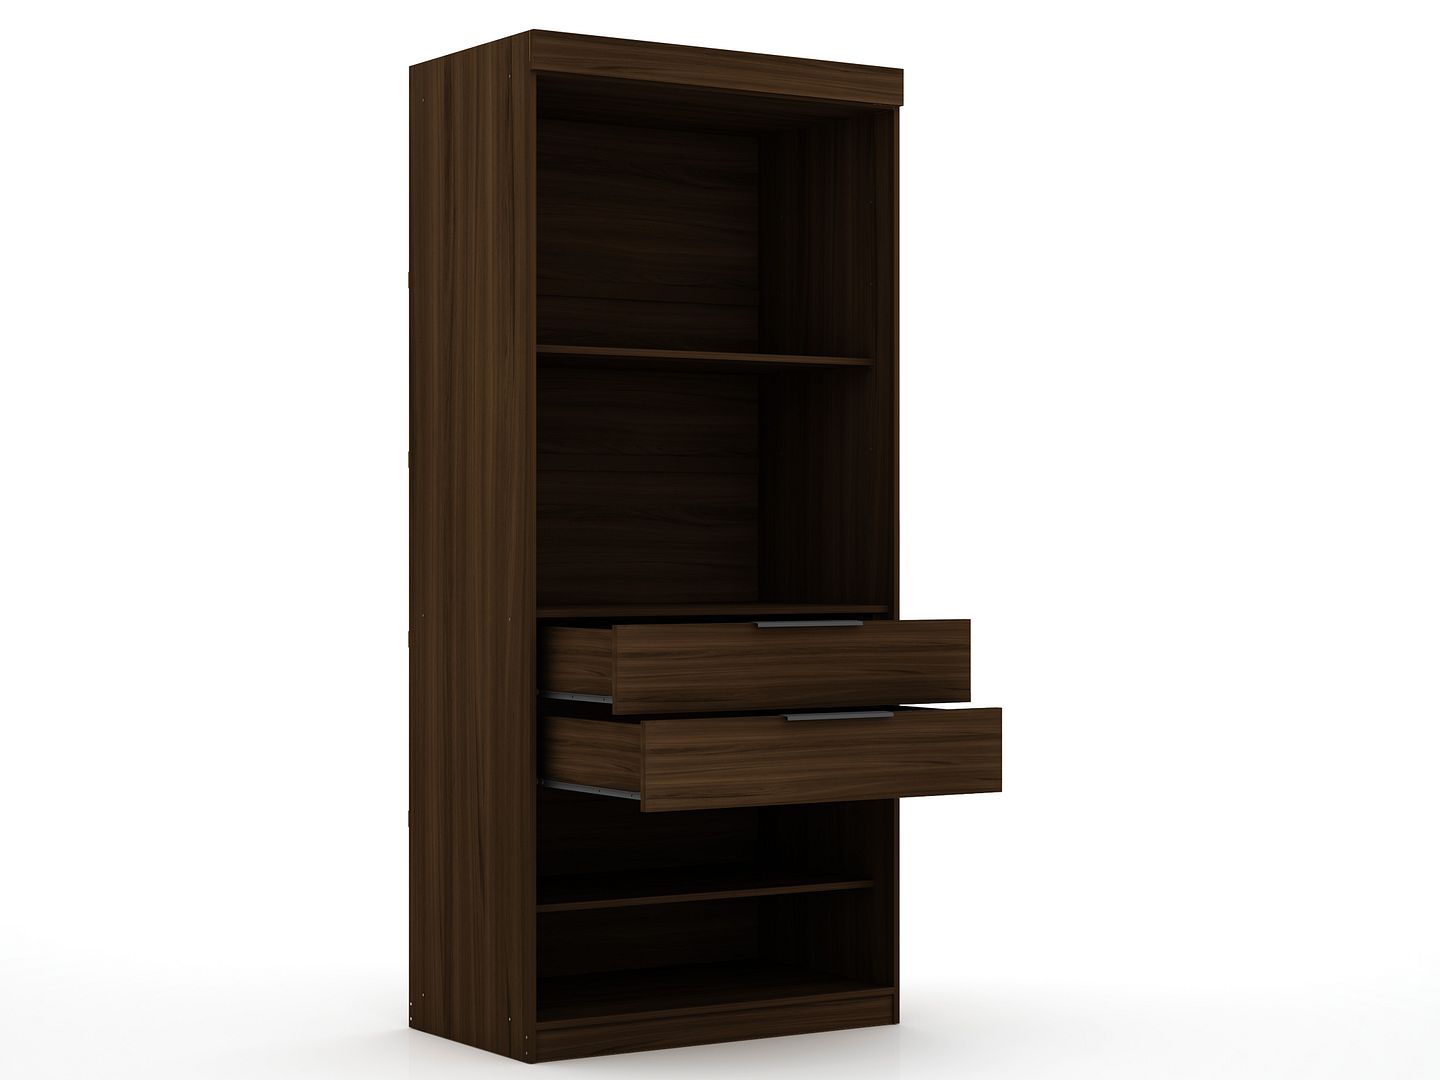 Mulberry 2.0 Sectional Wardrobe Closet - East Shore Modern Home Furnishings